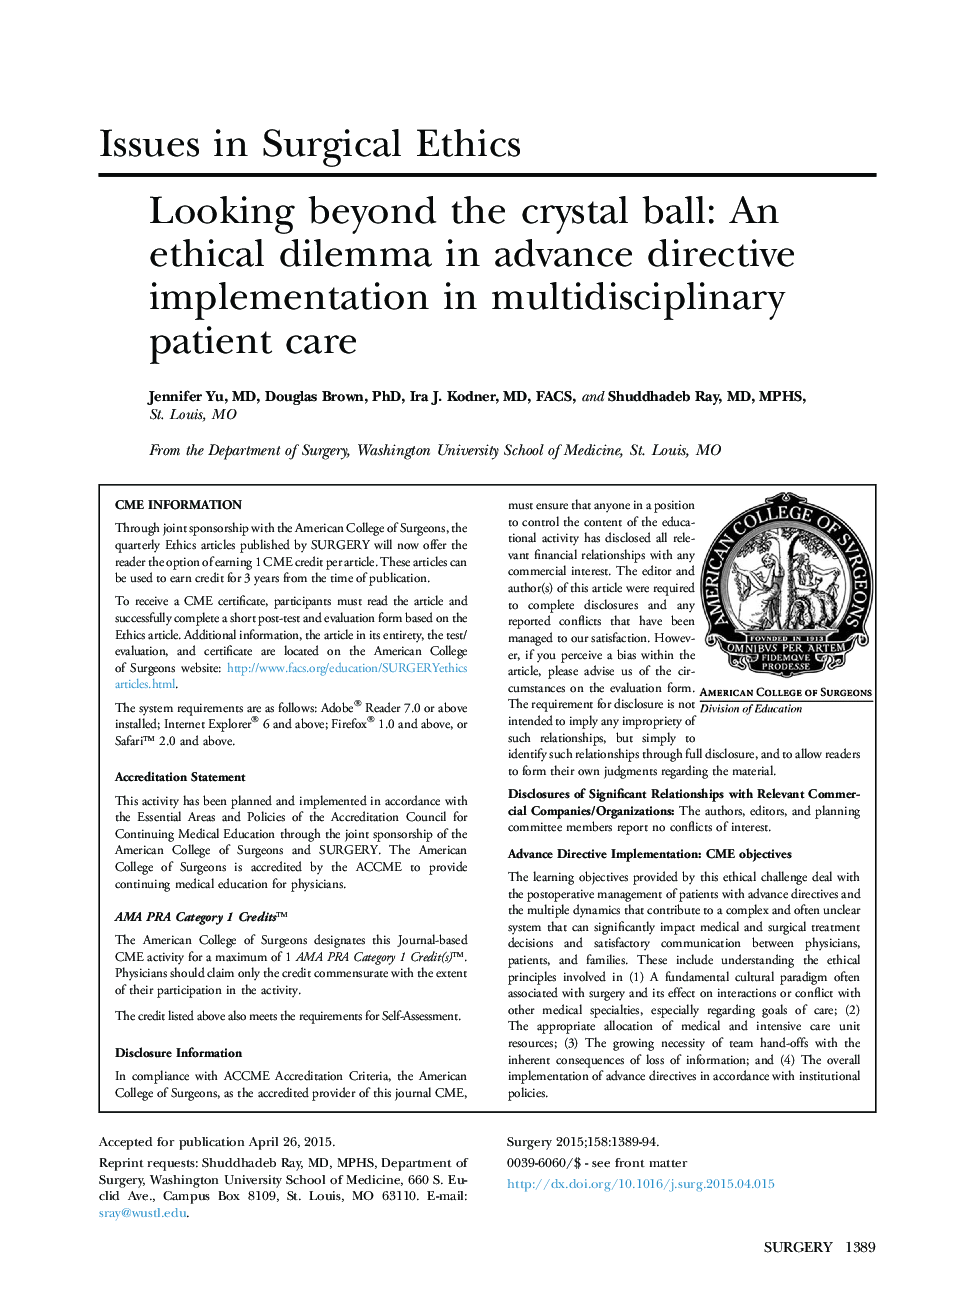 Looking beyond the crystal ball: An ethical dilemma in advance directive implementation in multidisciplinary patient care